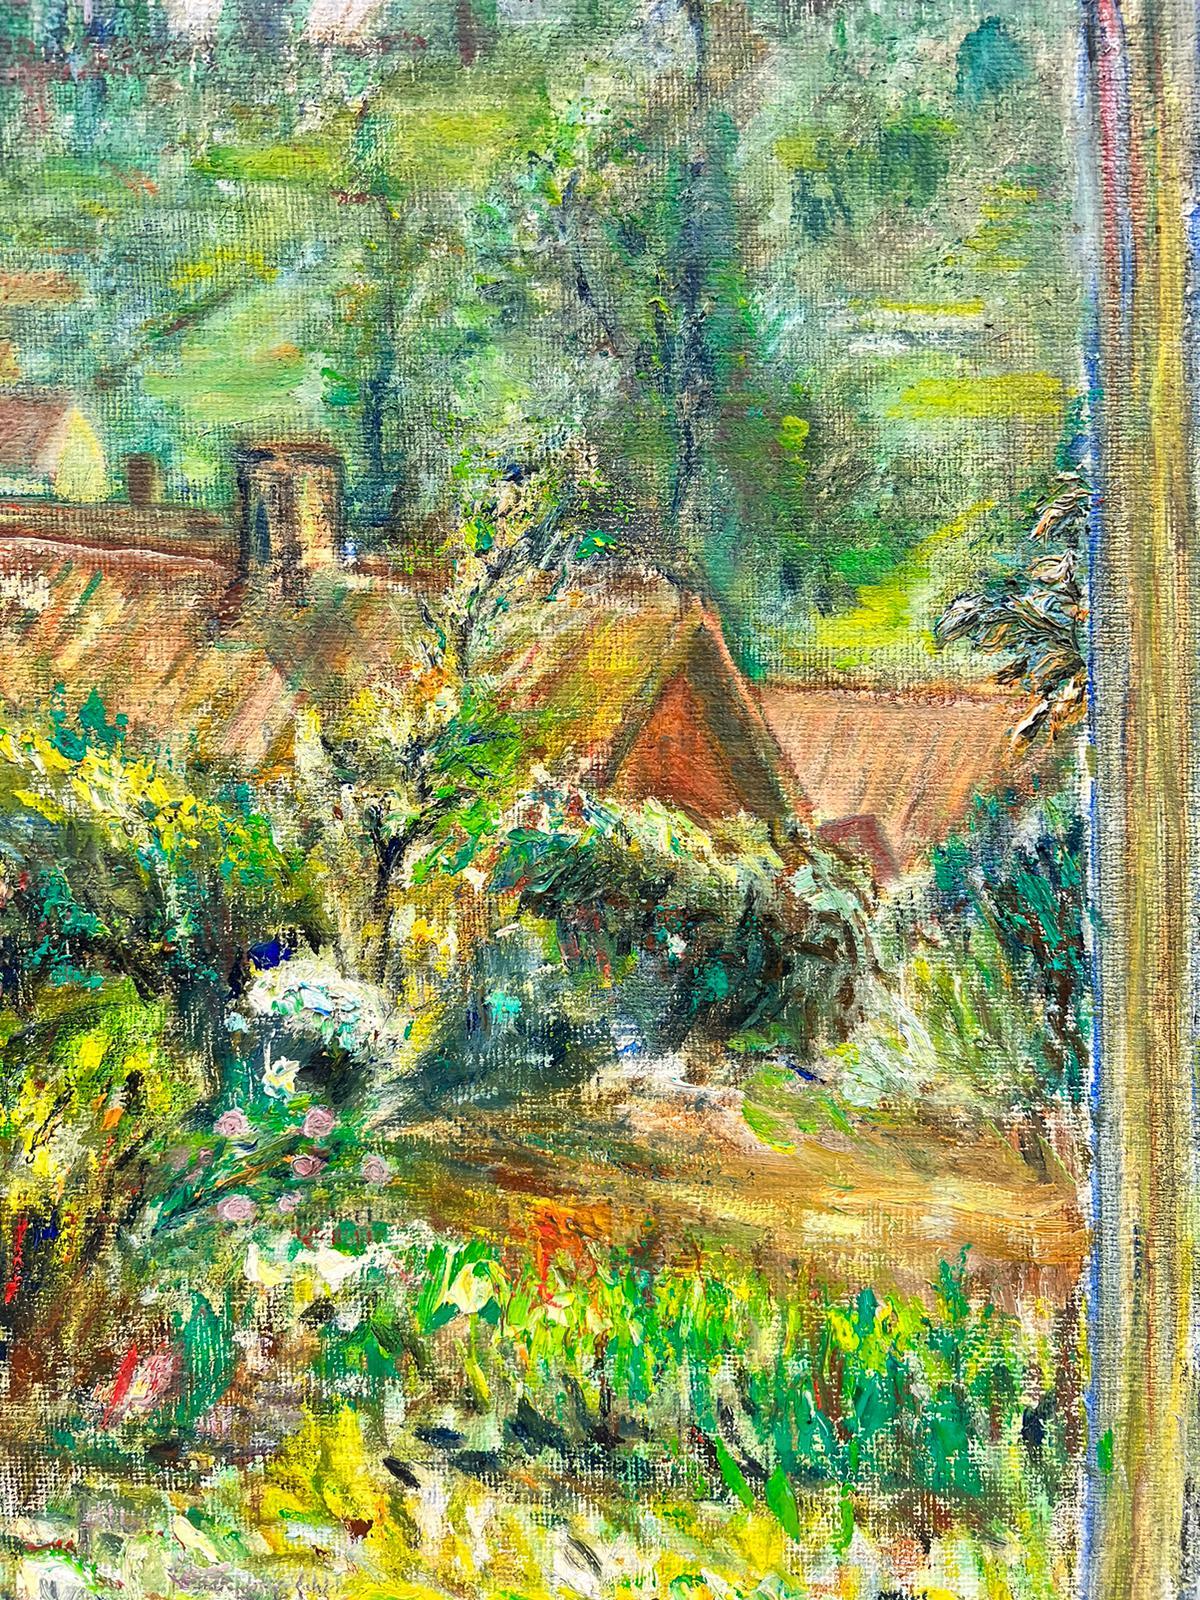 Dreamy French Impressionist View from Window over Green Garden Landscape oil - Painting by 1900's French Impressionist